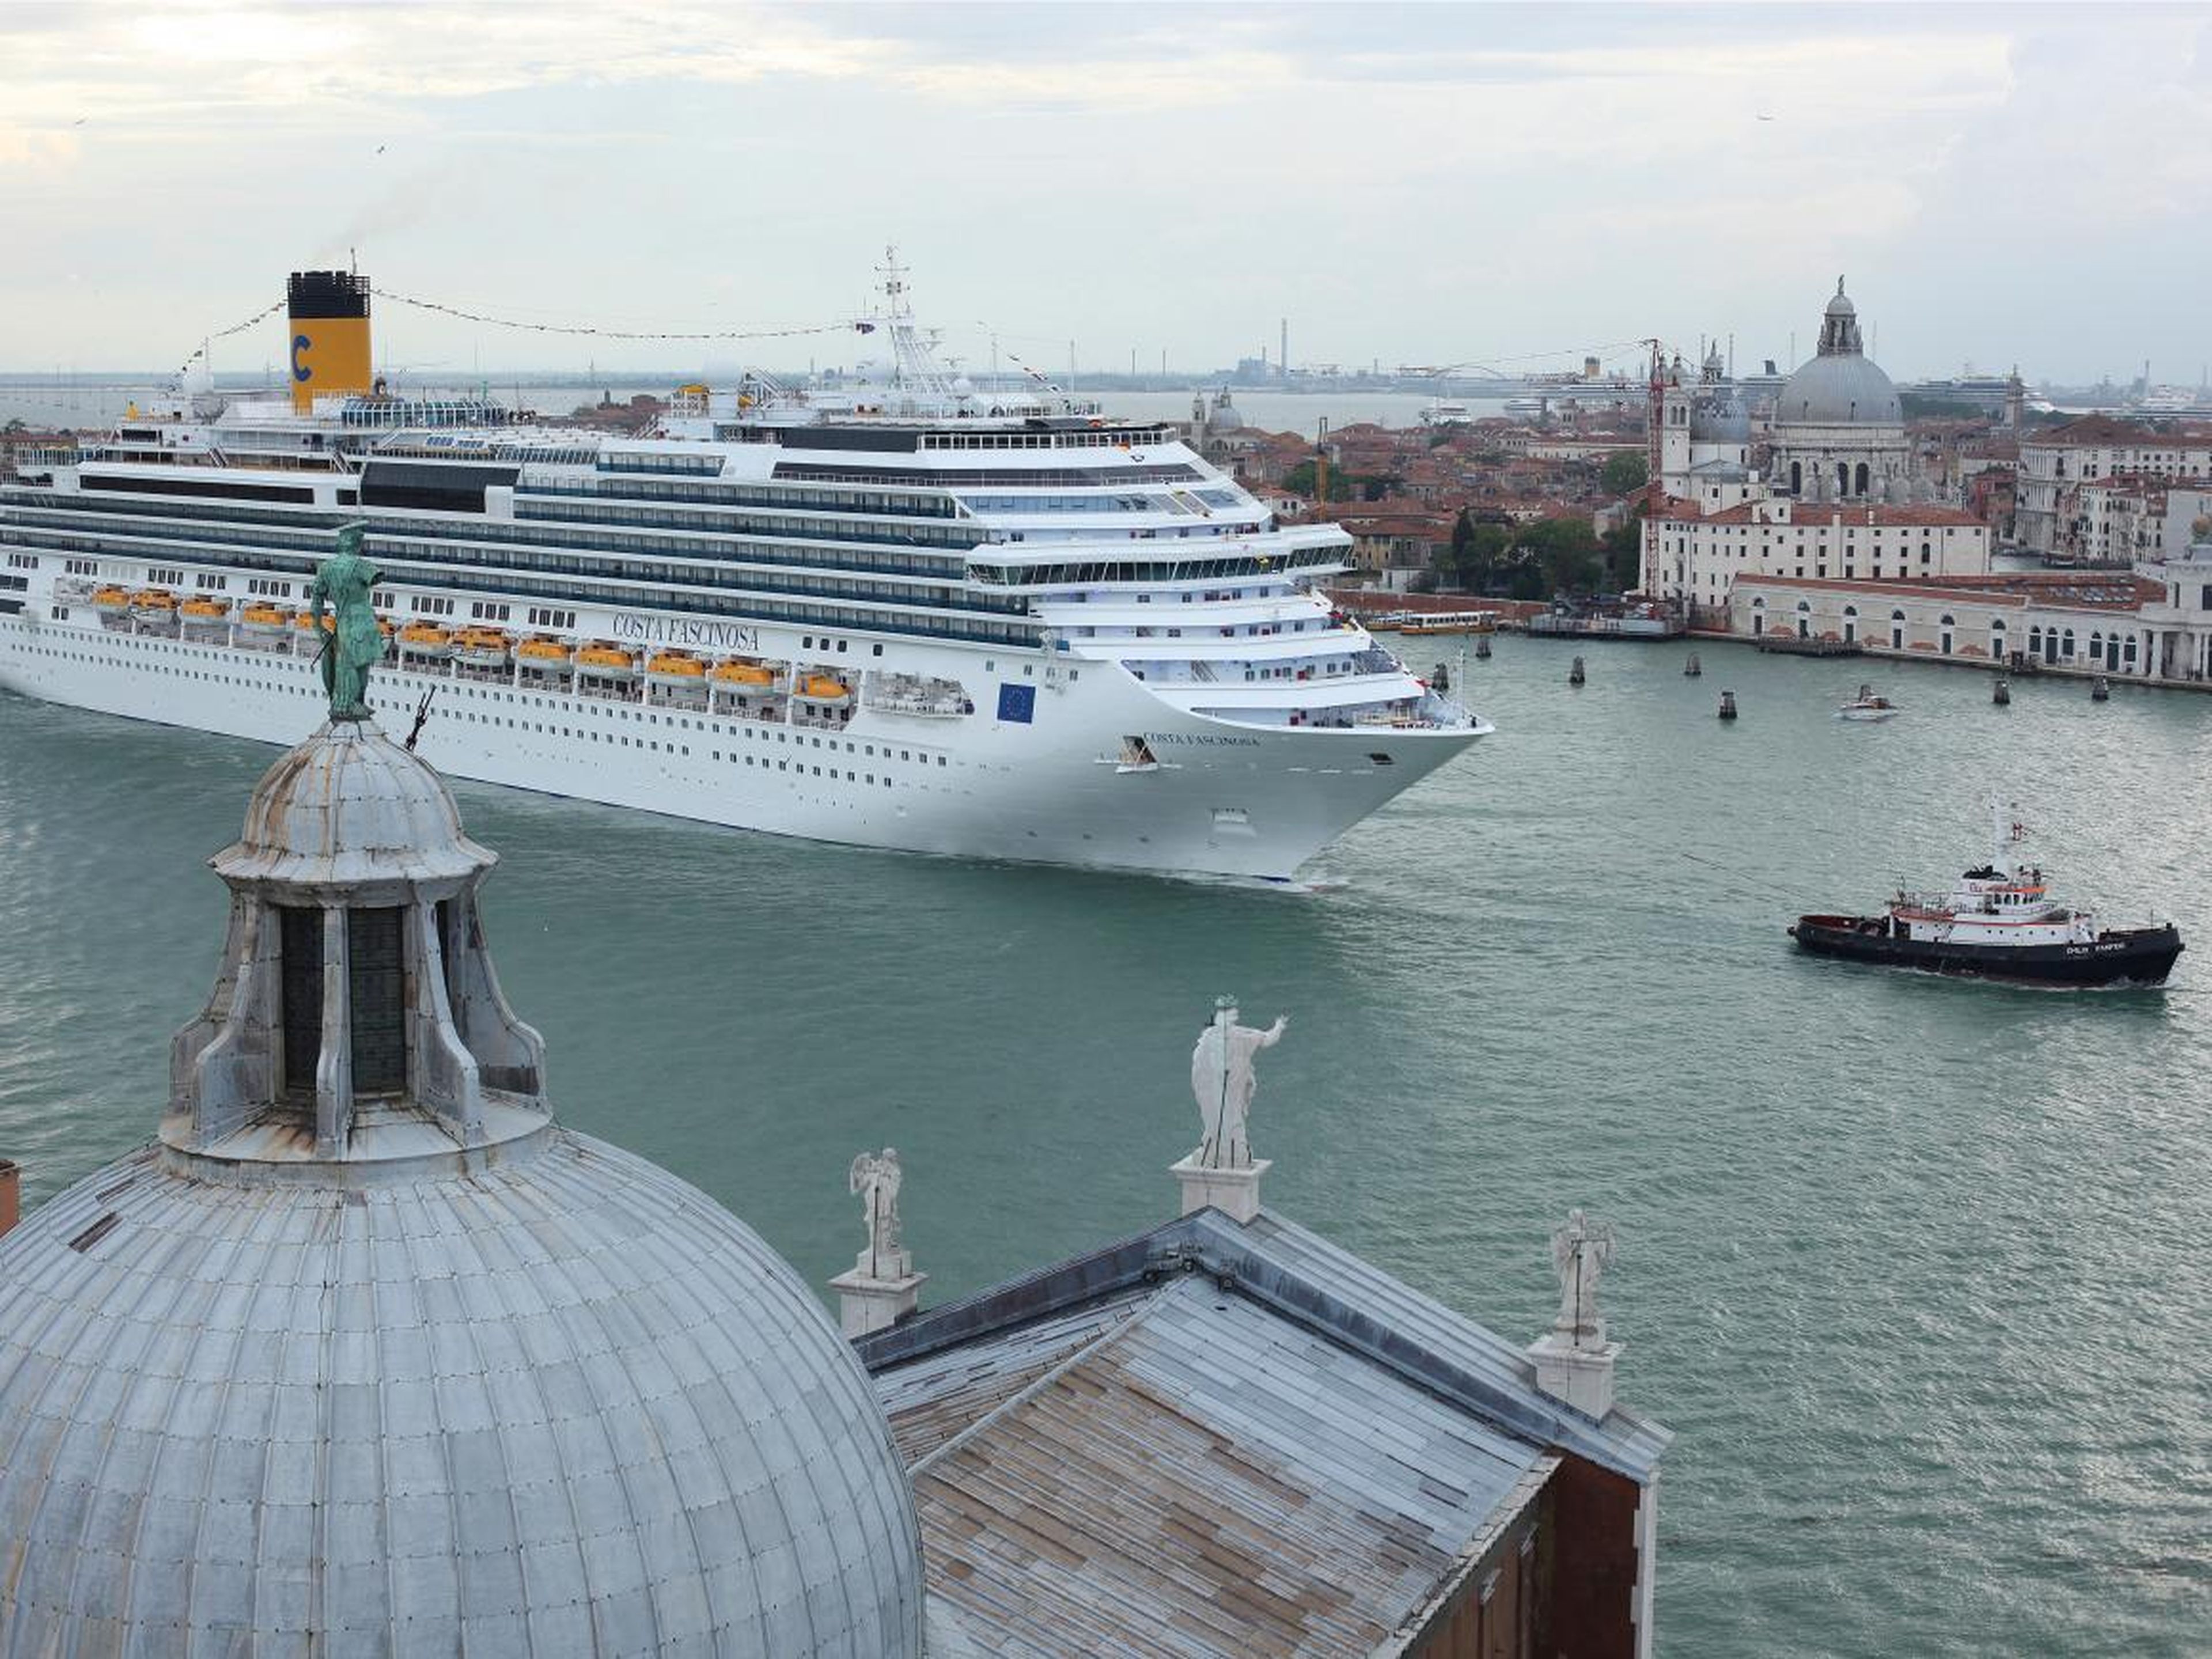 One environmental scientist told The Guardian that "the passage of every single ship causes erosion of the mudflats and sediment loss" in the heart of historic Venice.